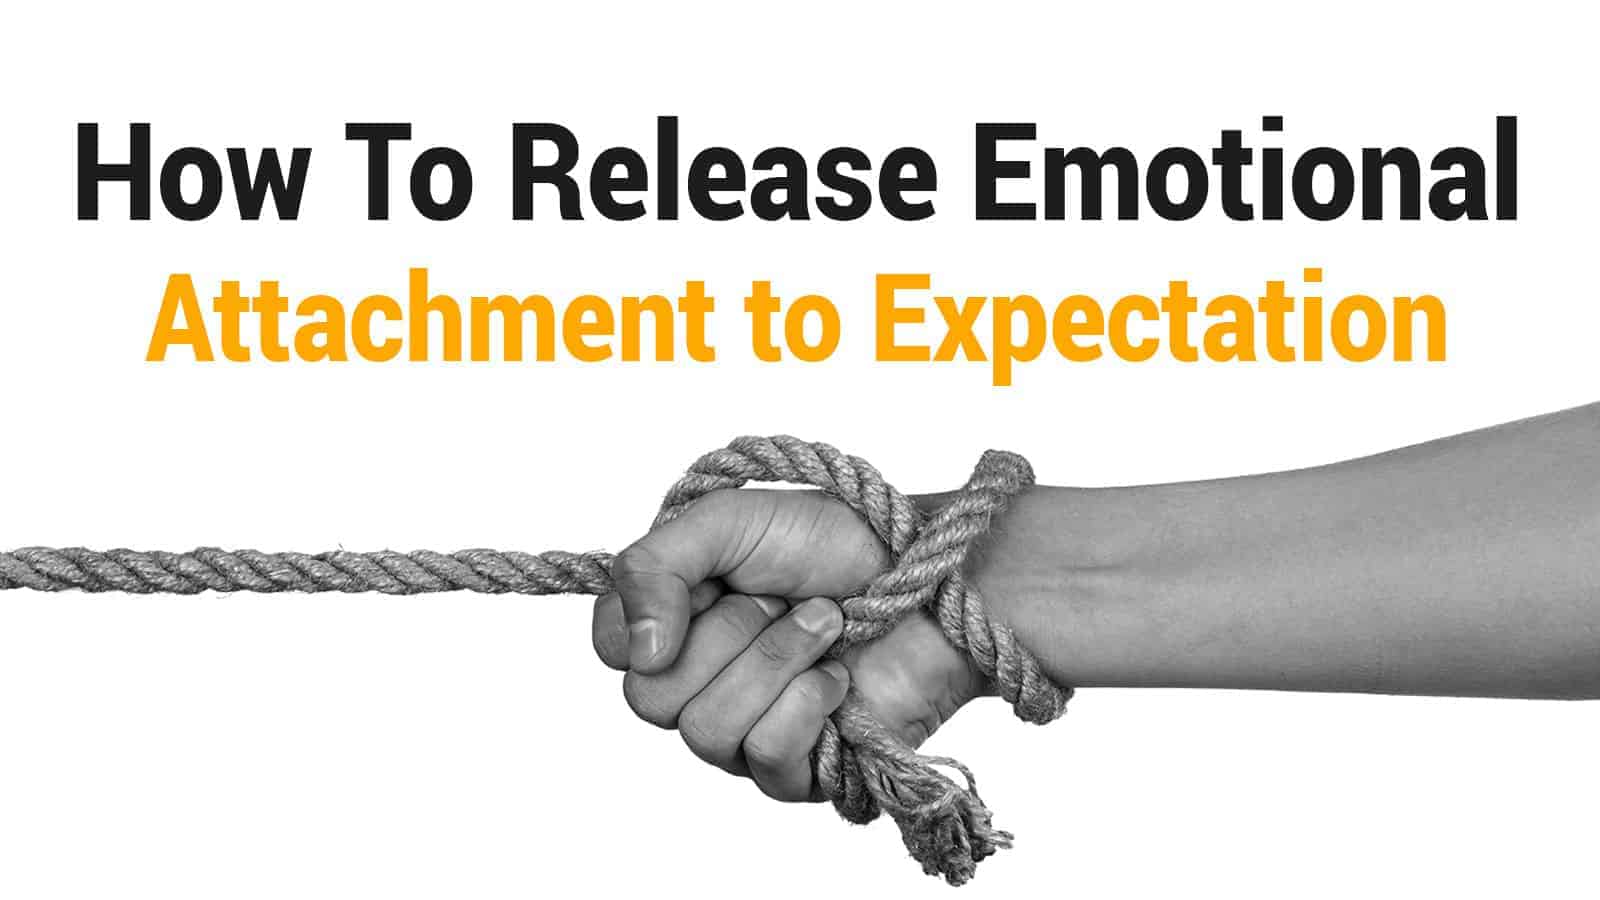 How To Release Emotional Attachment to Expectation